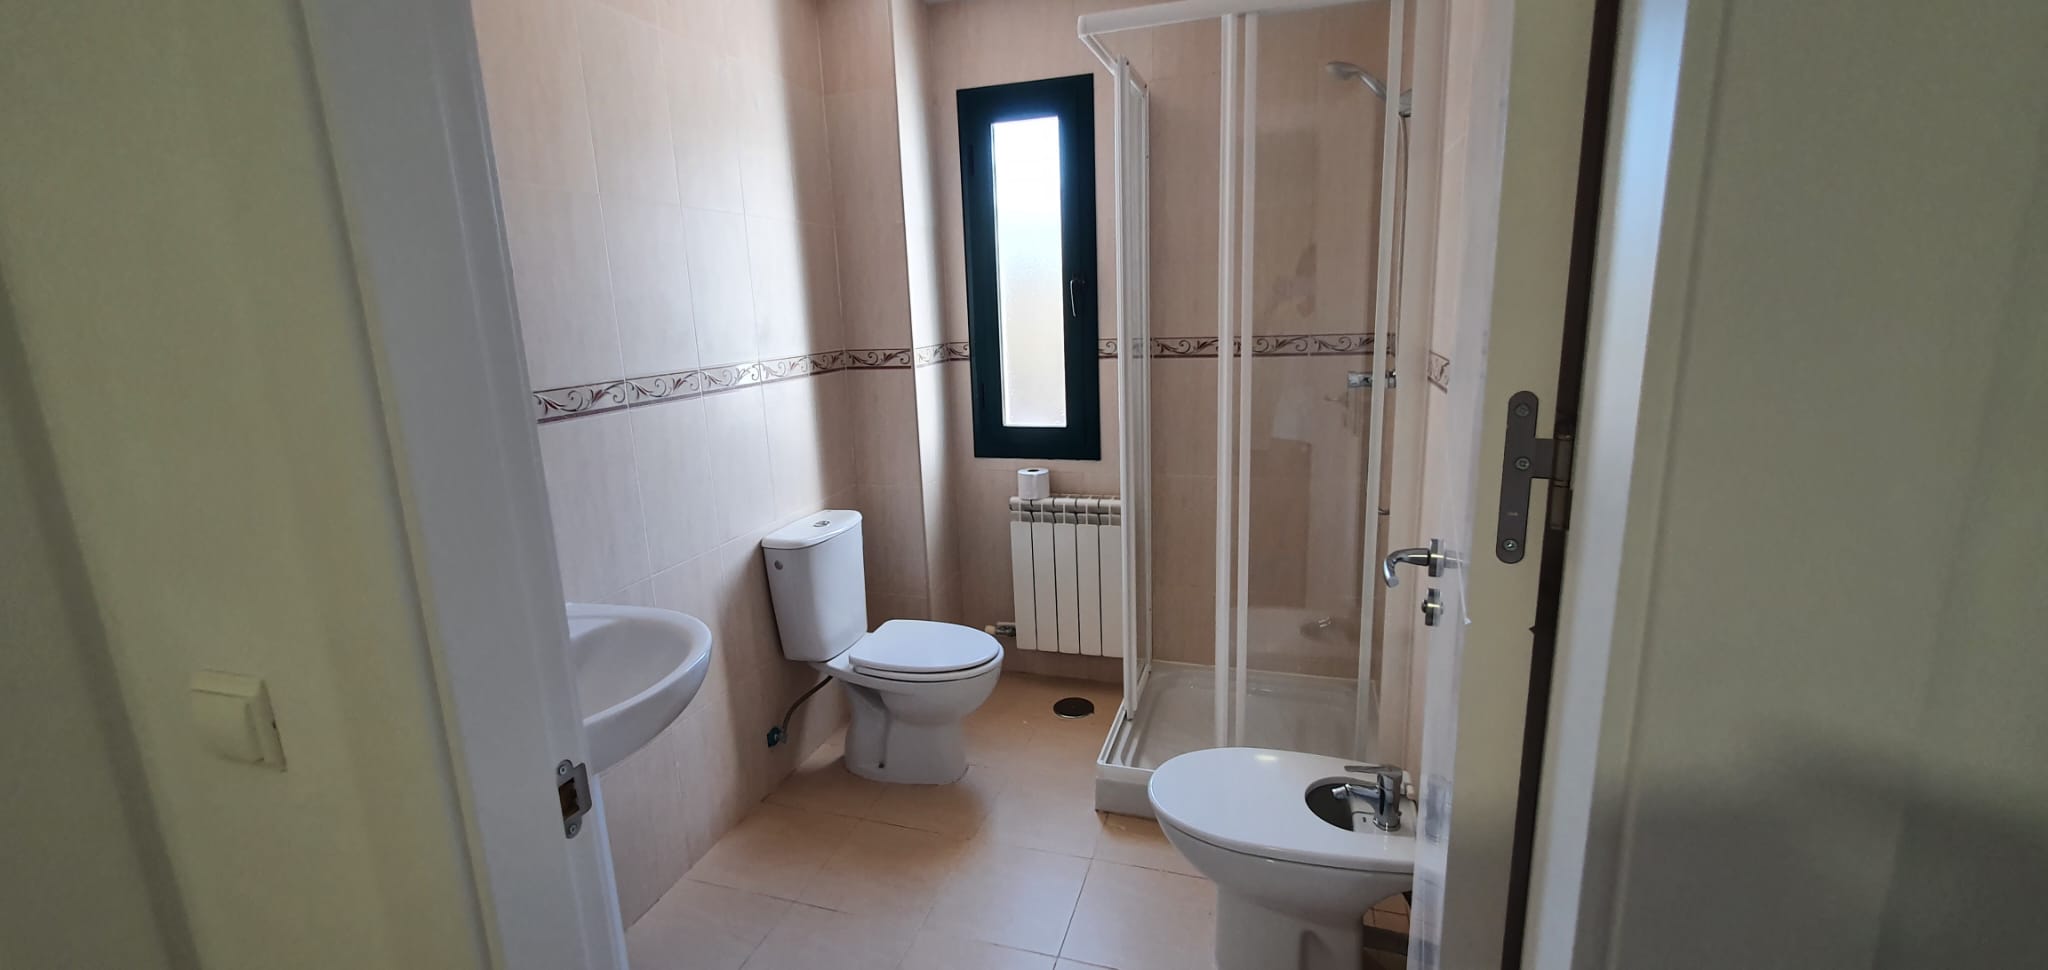 apartment for rent in Mancha Real - bathroom